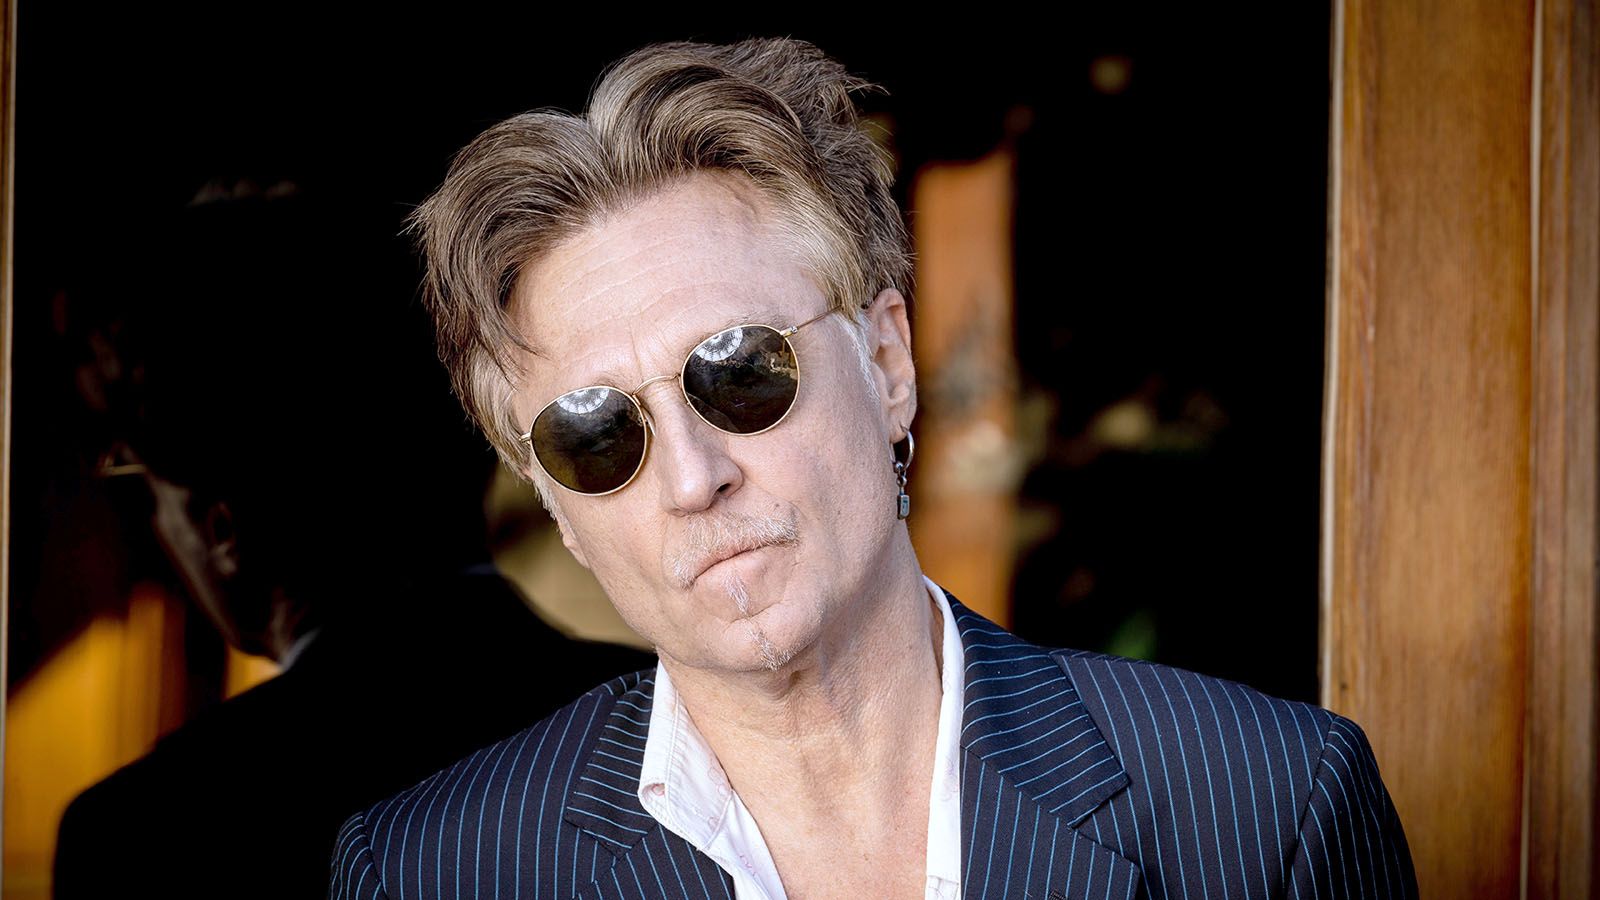 John Waite will be at Sweetwater Performance Pavilion on Friday, June 7.